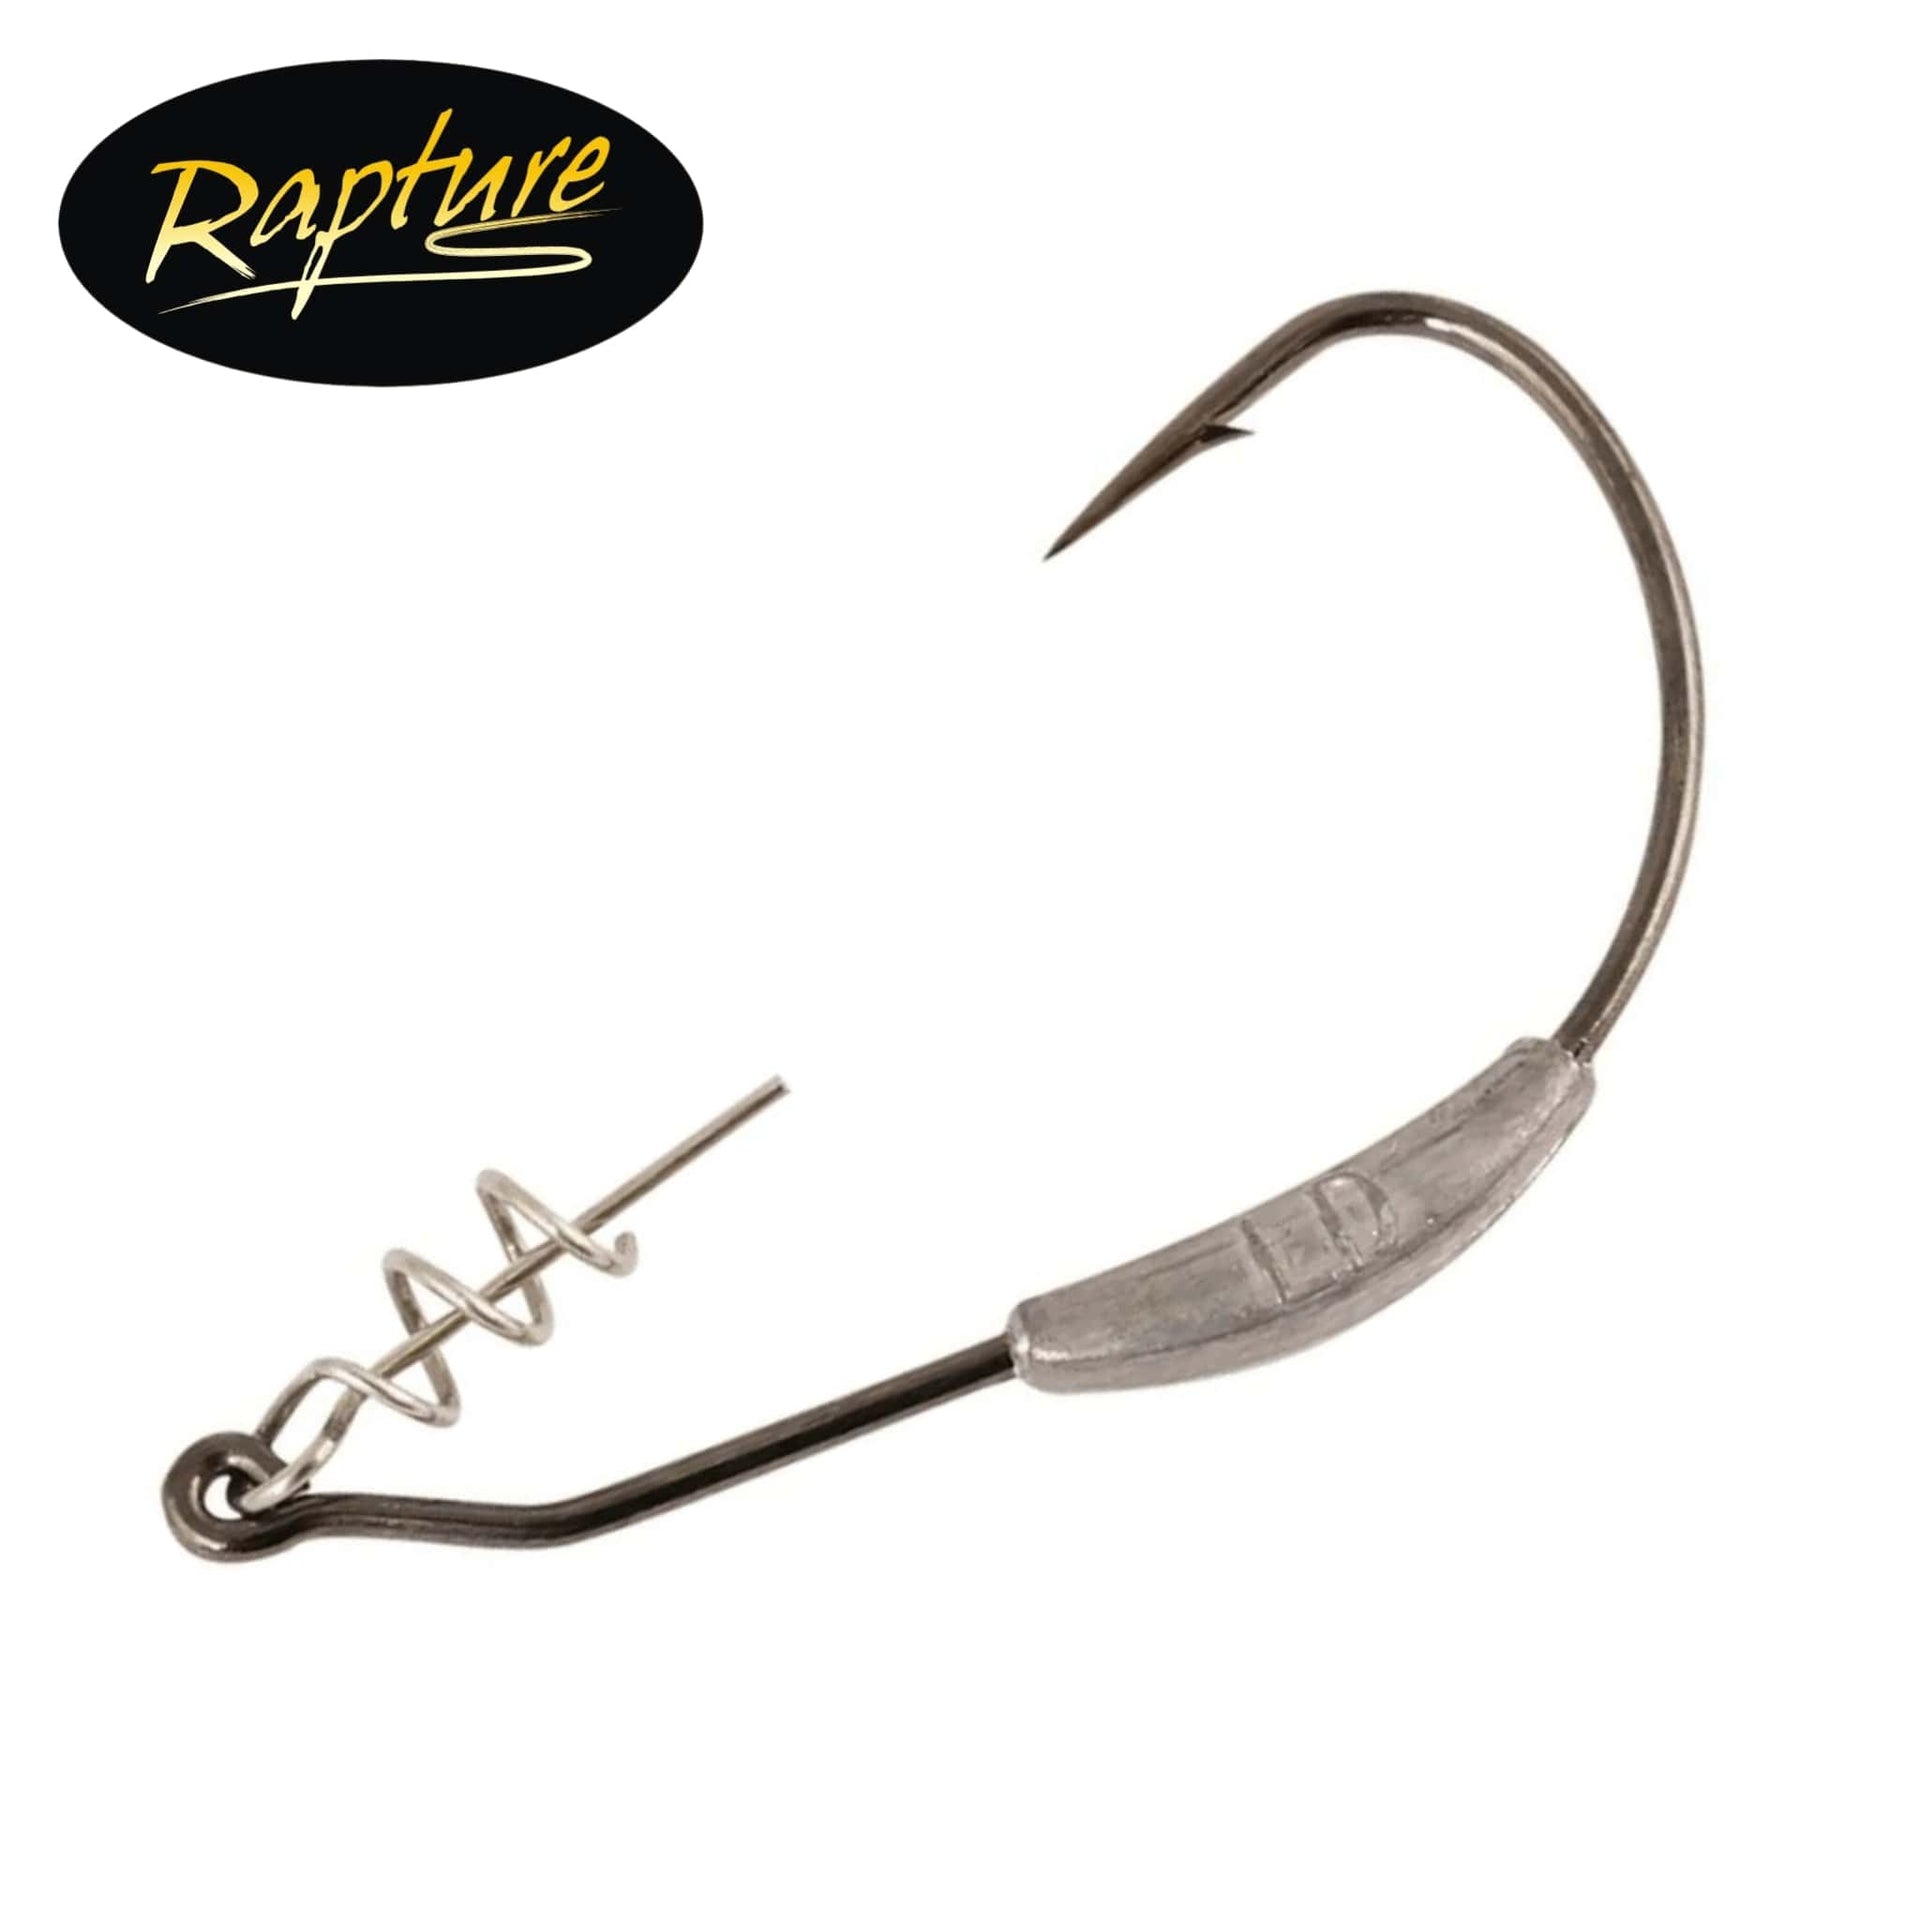 Rapture Spring Lock Weighted Hooks – Fat Catch